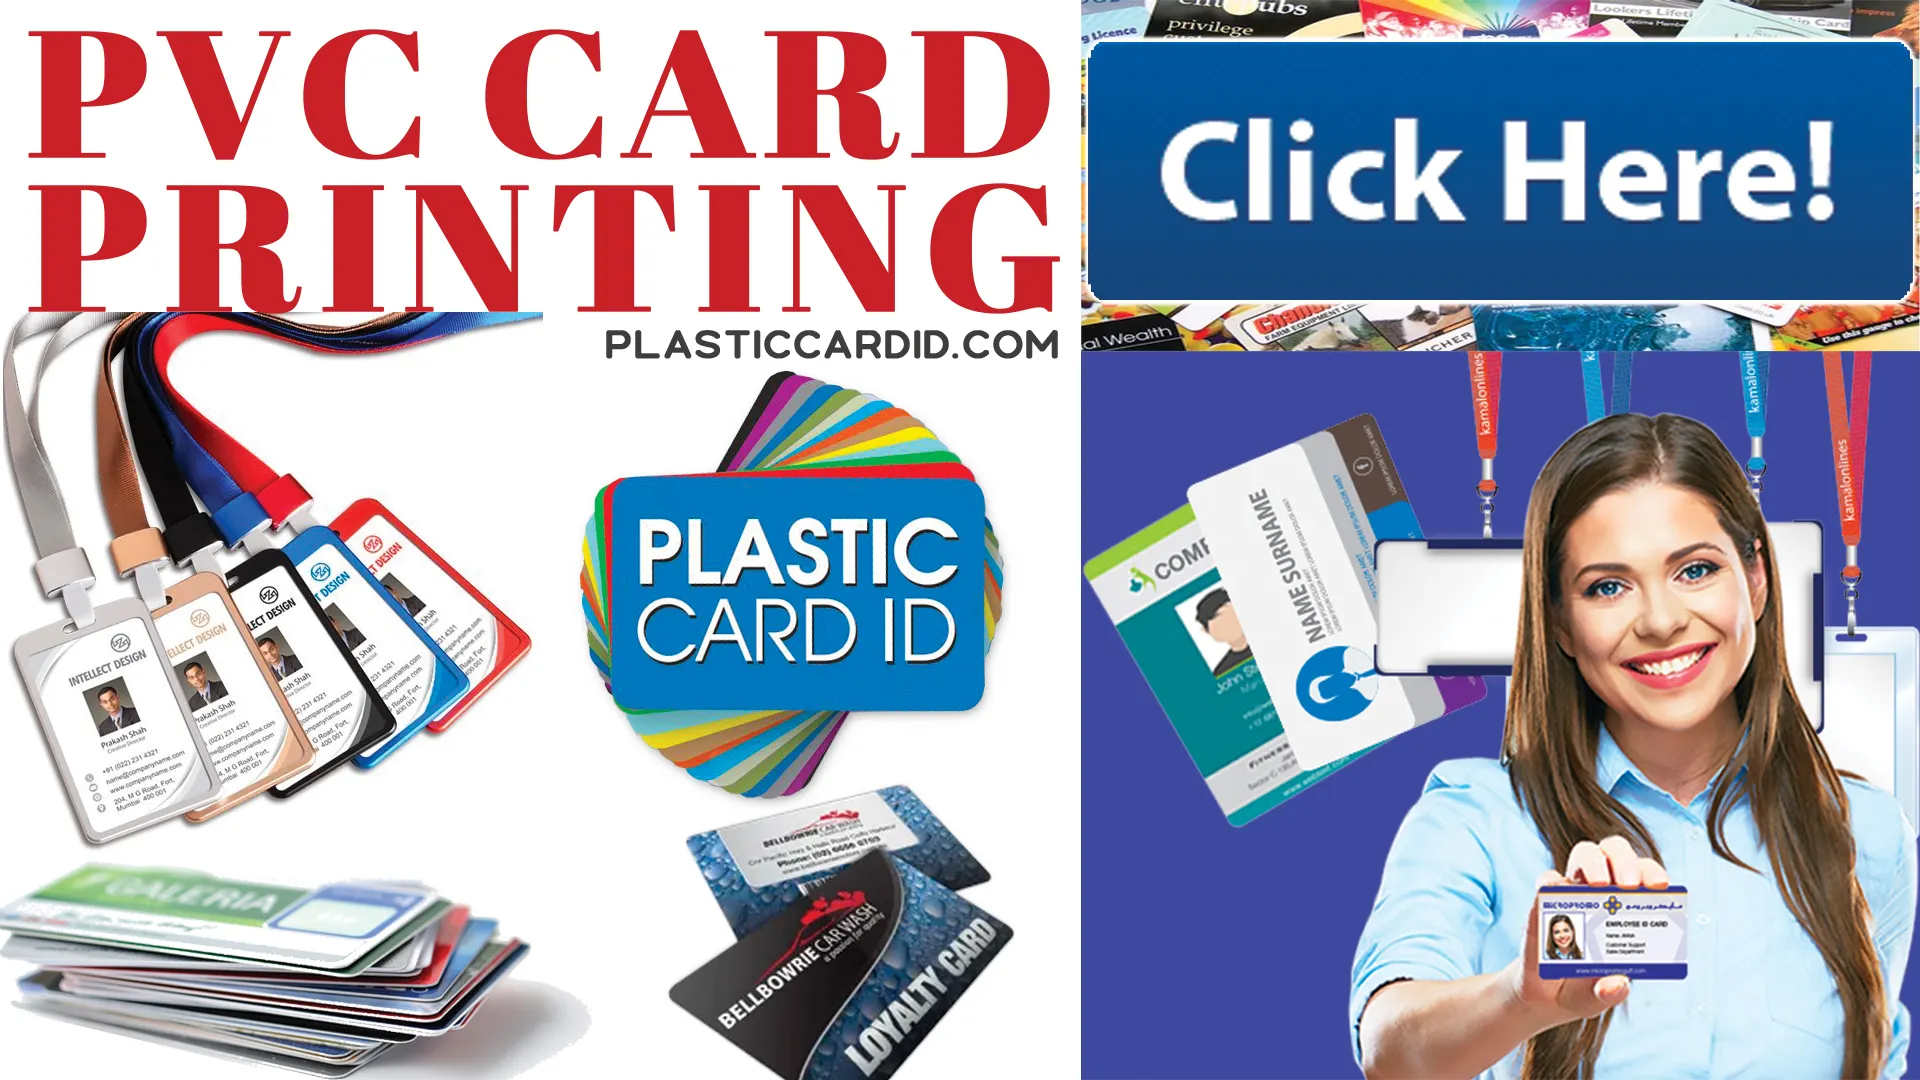 Premium Card Printers for Professional and Efficient Printing